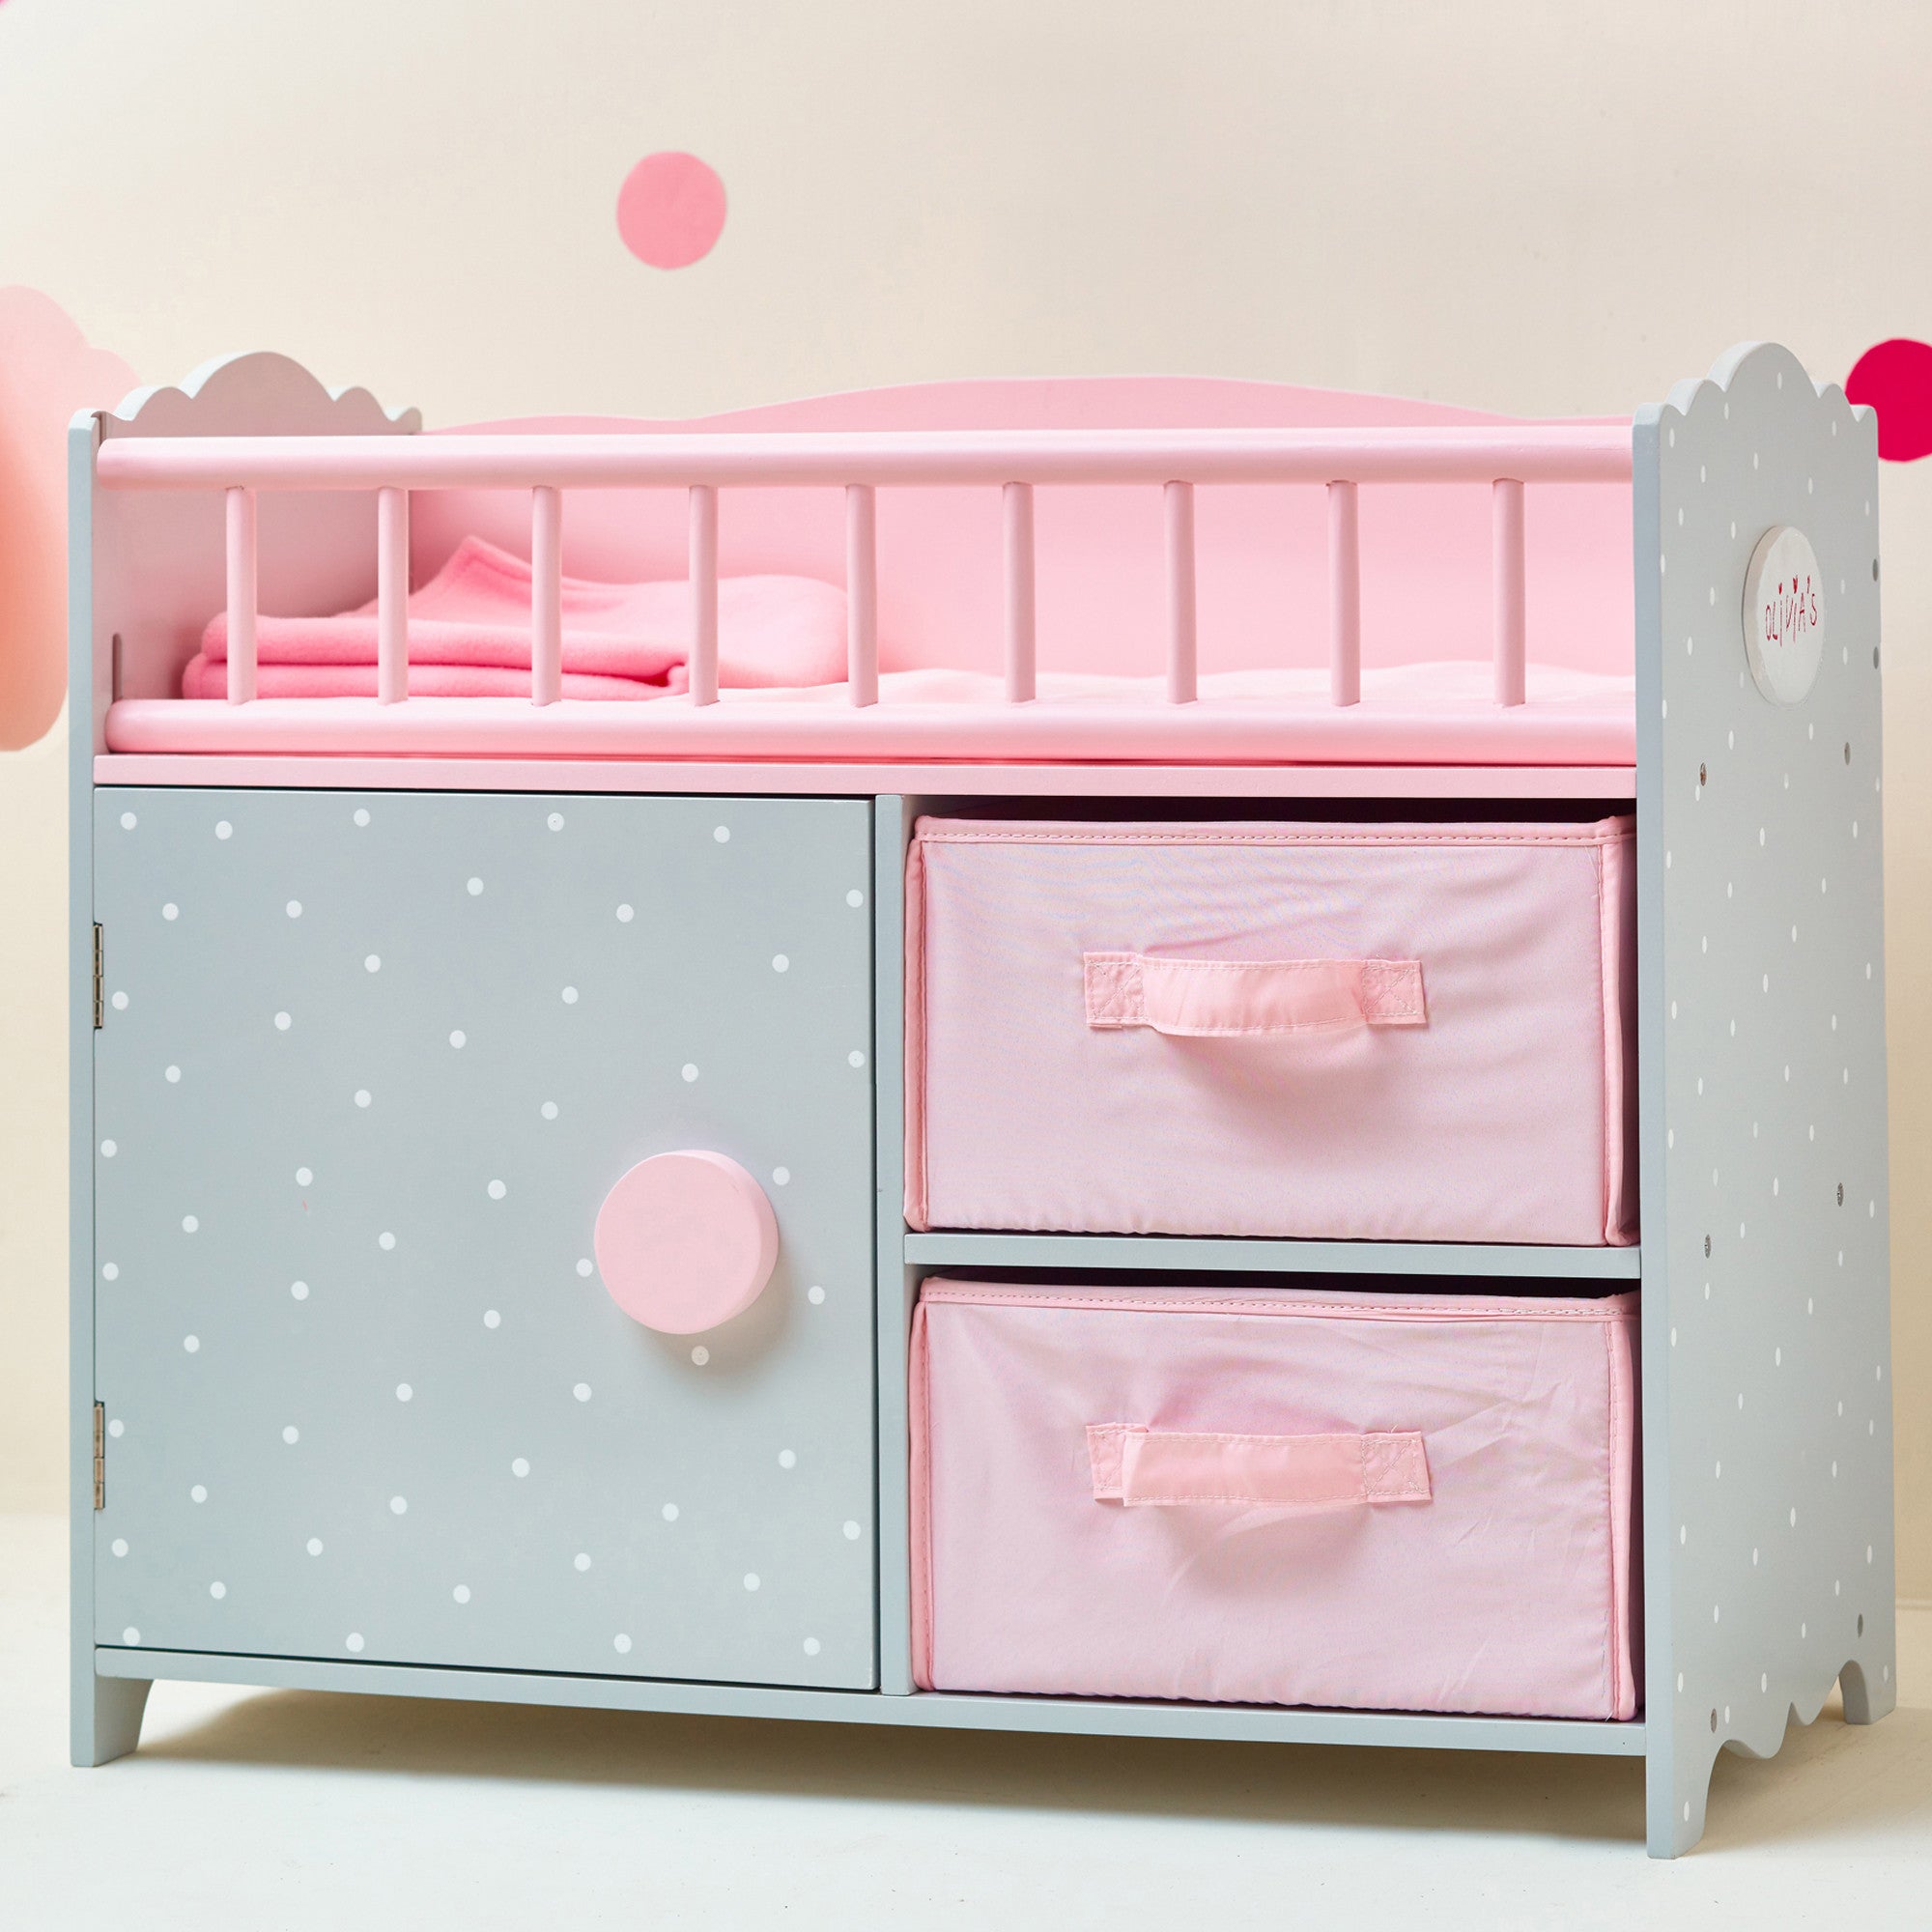 Olivia's Little World Polka Dots Princess Baby Doll Crib with Storage Closet and Drawers, Gray/Pink